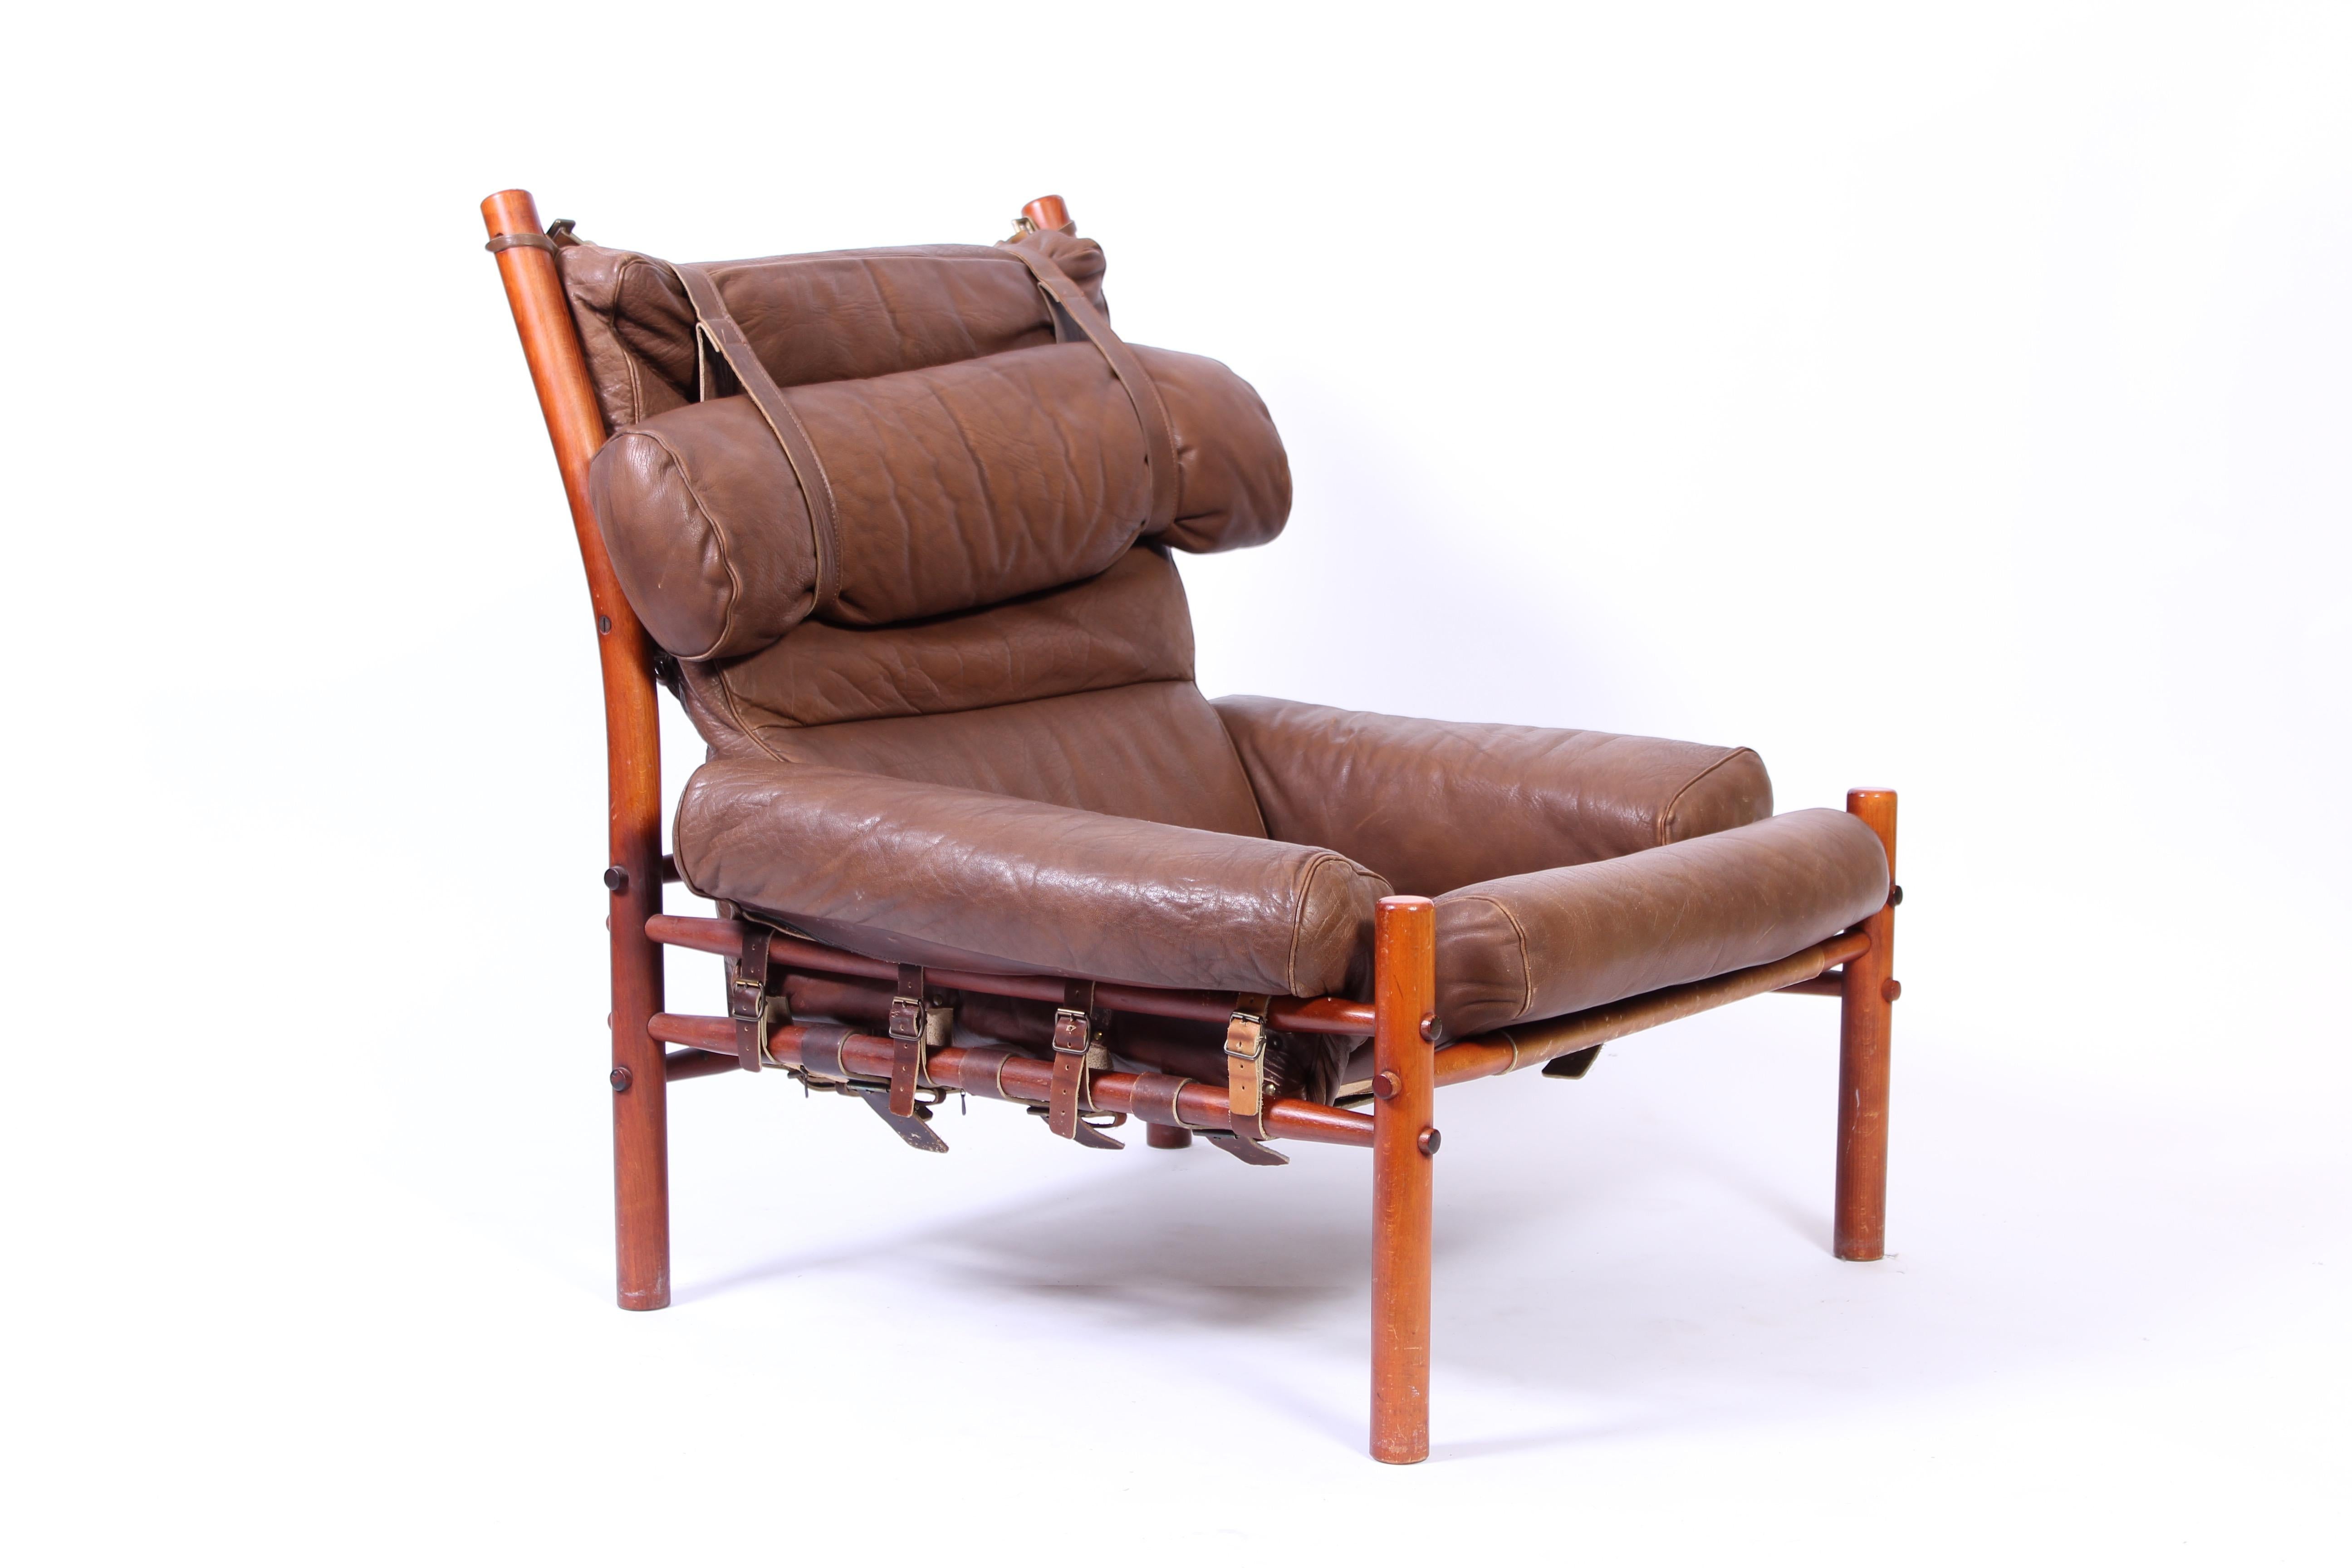 A buffalo leather lounge chair designed by Arne Norell and manufactured b his own company. The chair has a stained beech frame and leather seat and back connected with leather straps. The leather is original and shows signs of usage and patina